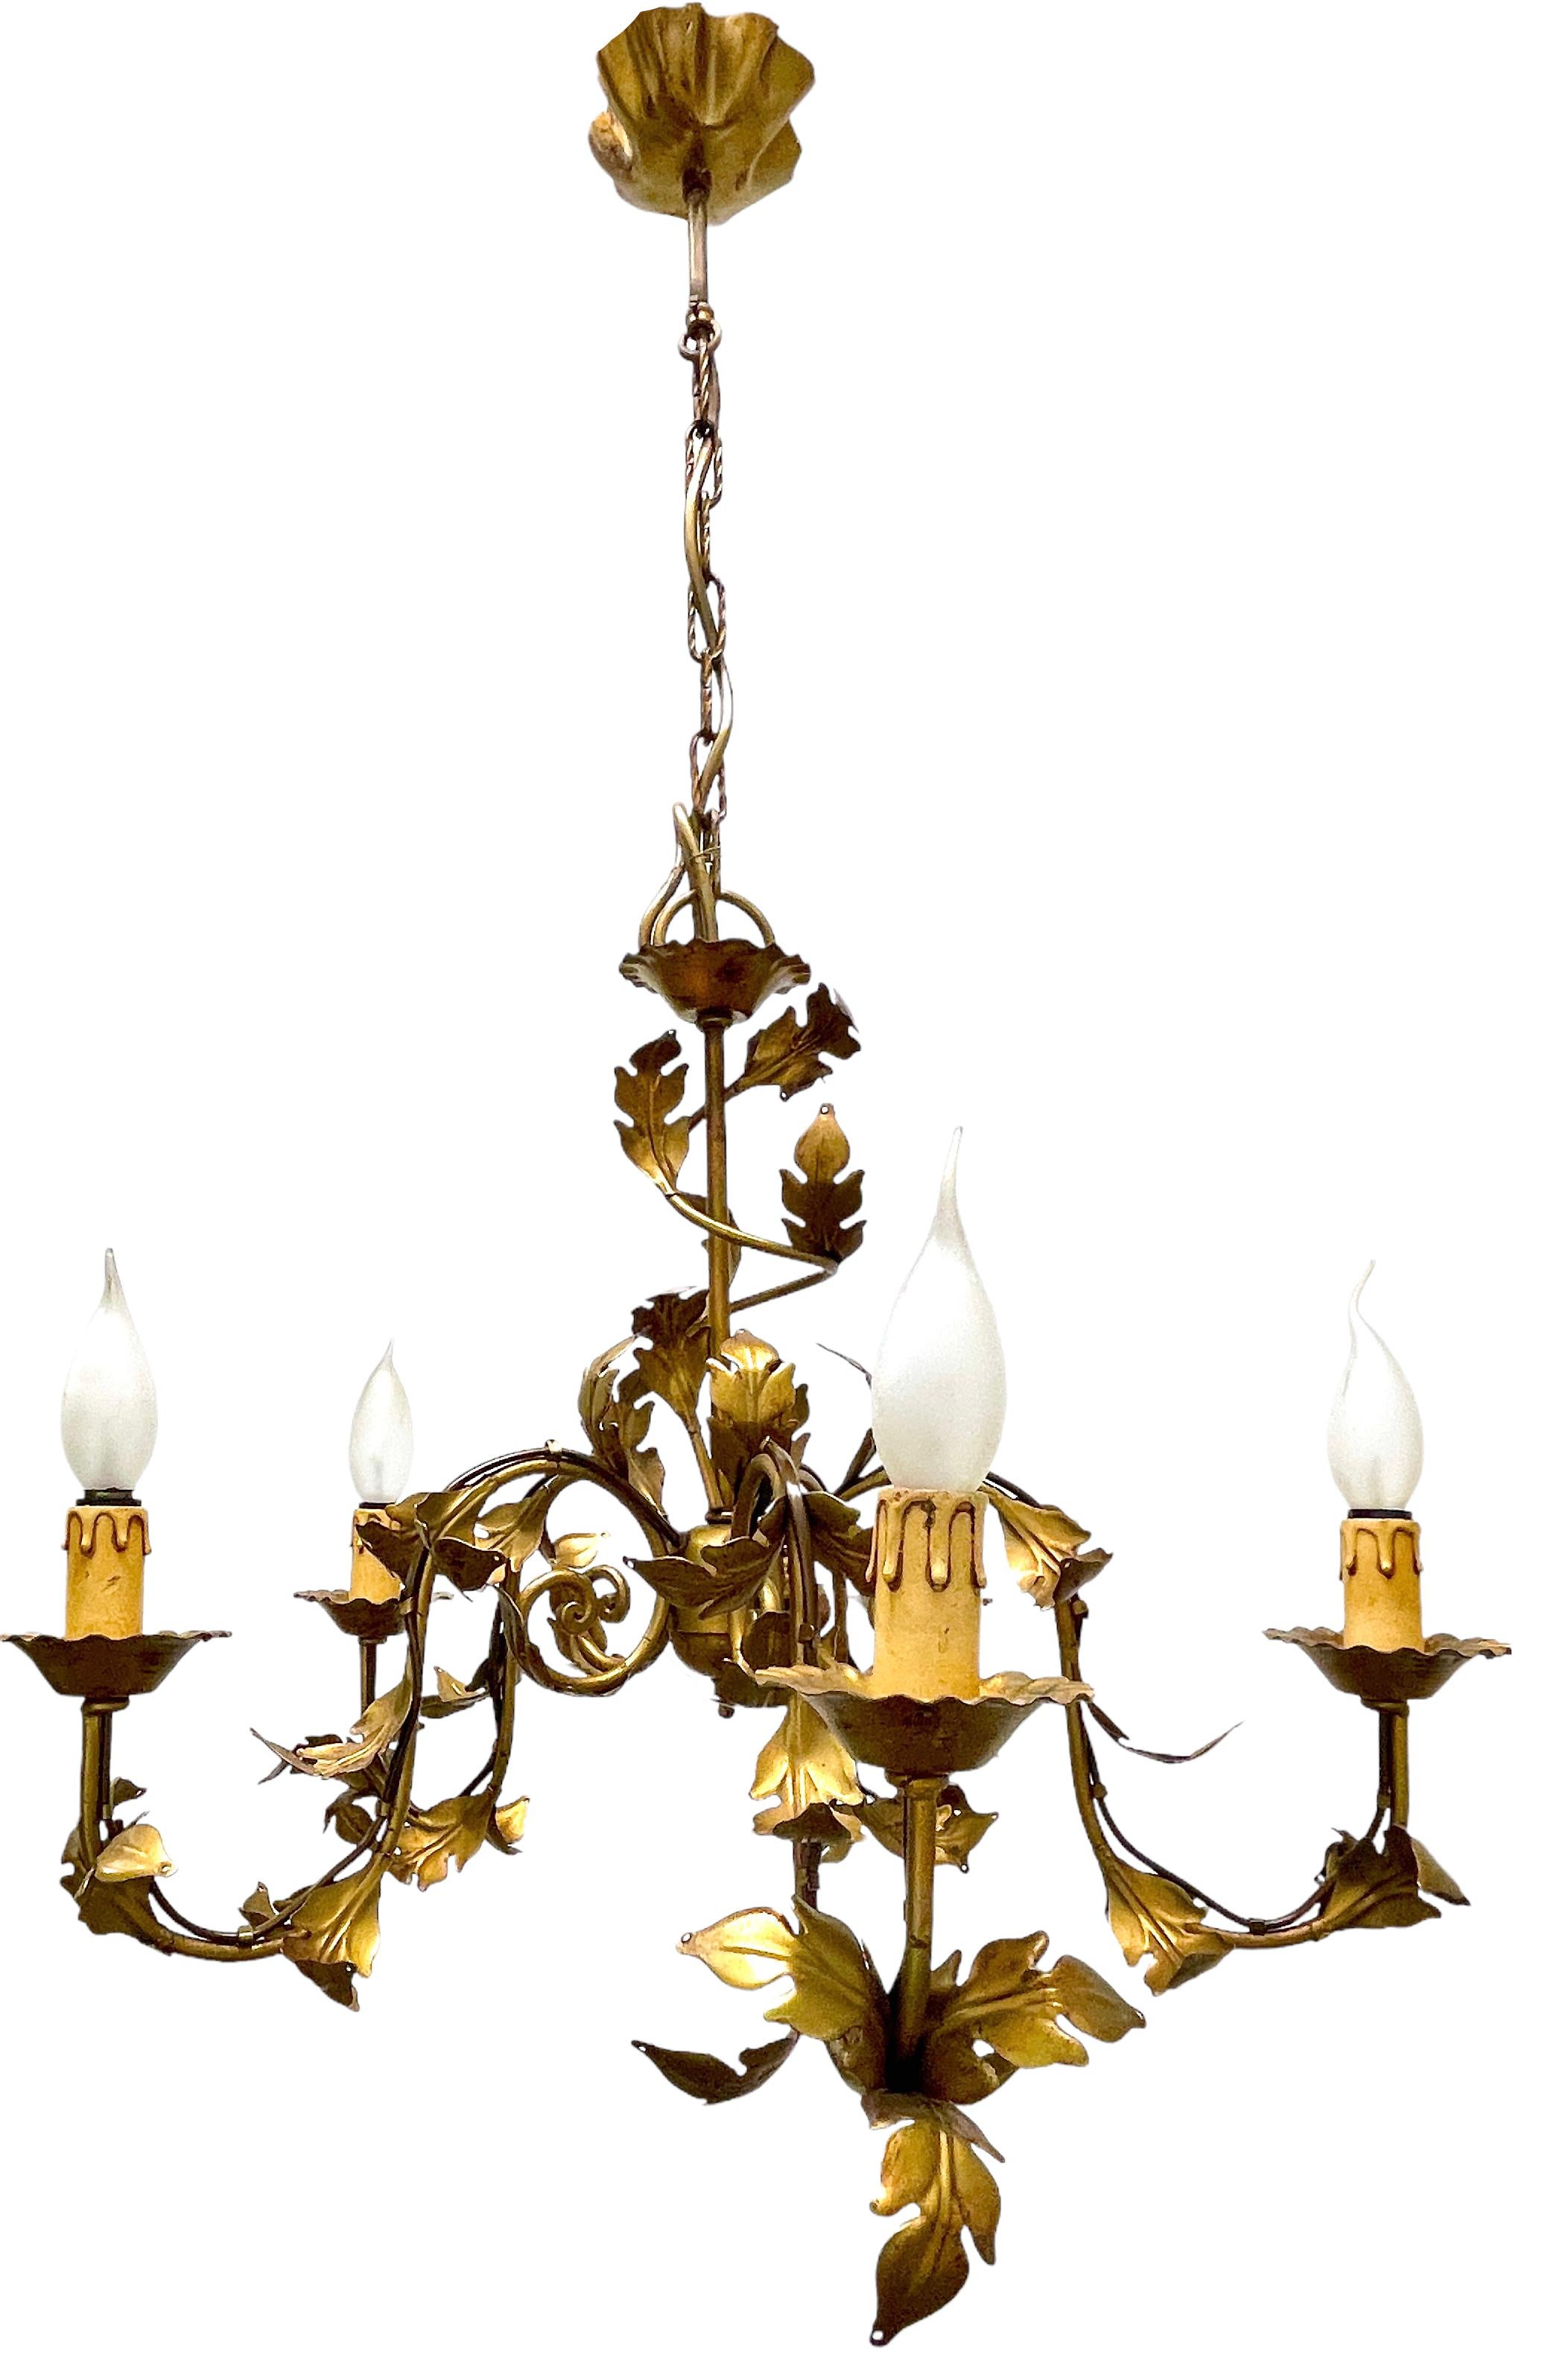 A Hollywood Regency midcentury gilt tole chandelier, the fixture requires five European E14 candelabra bulbs, each bulb up to 40 watts. This light has a beautiful patina and gives each room an eclectic statement. Lightbulbs shown in the pictures are